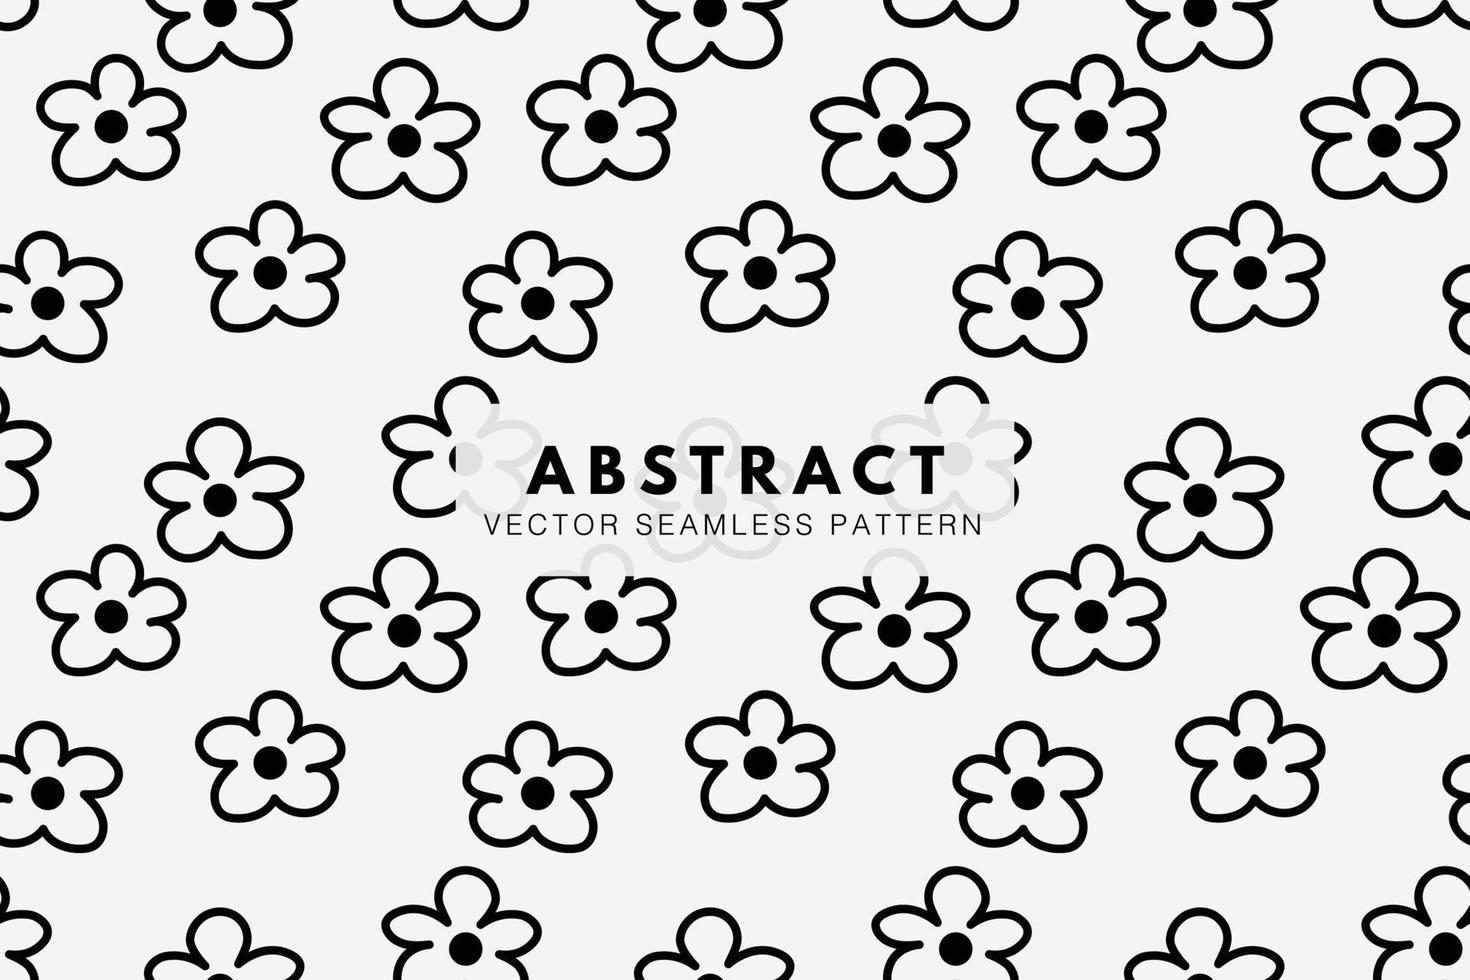 Floral simple abstract seamless repeat vector pattern